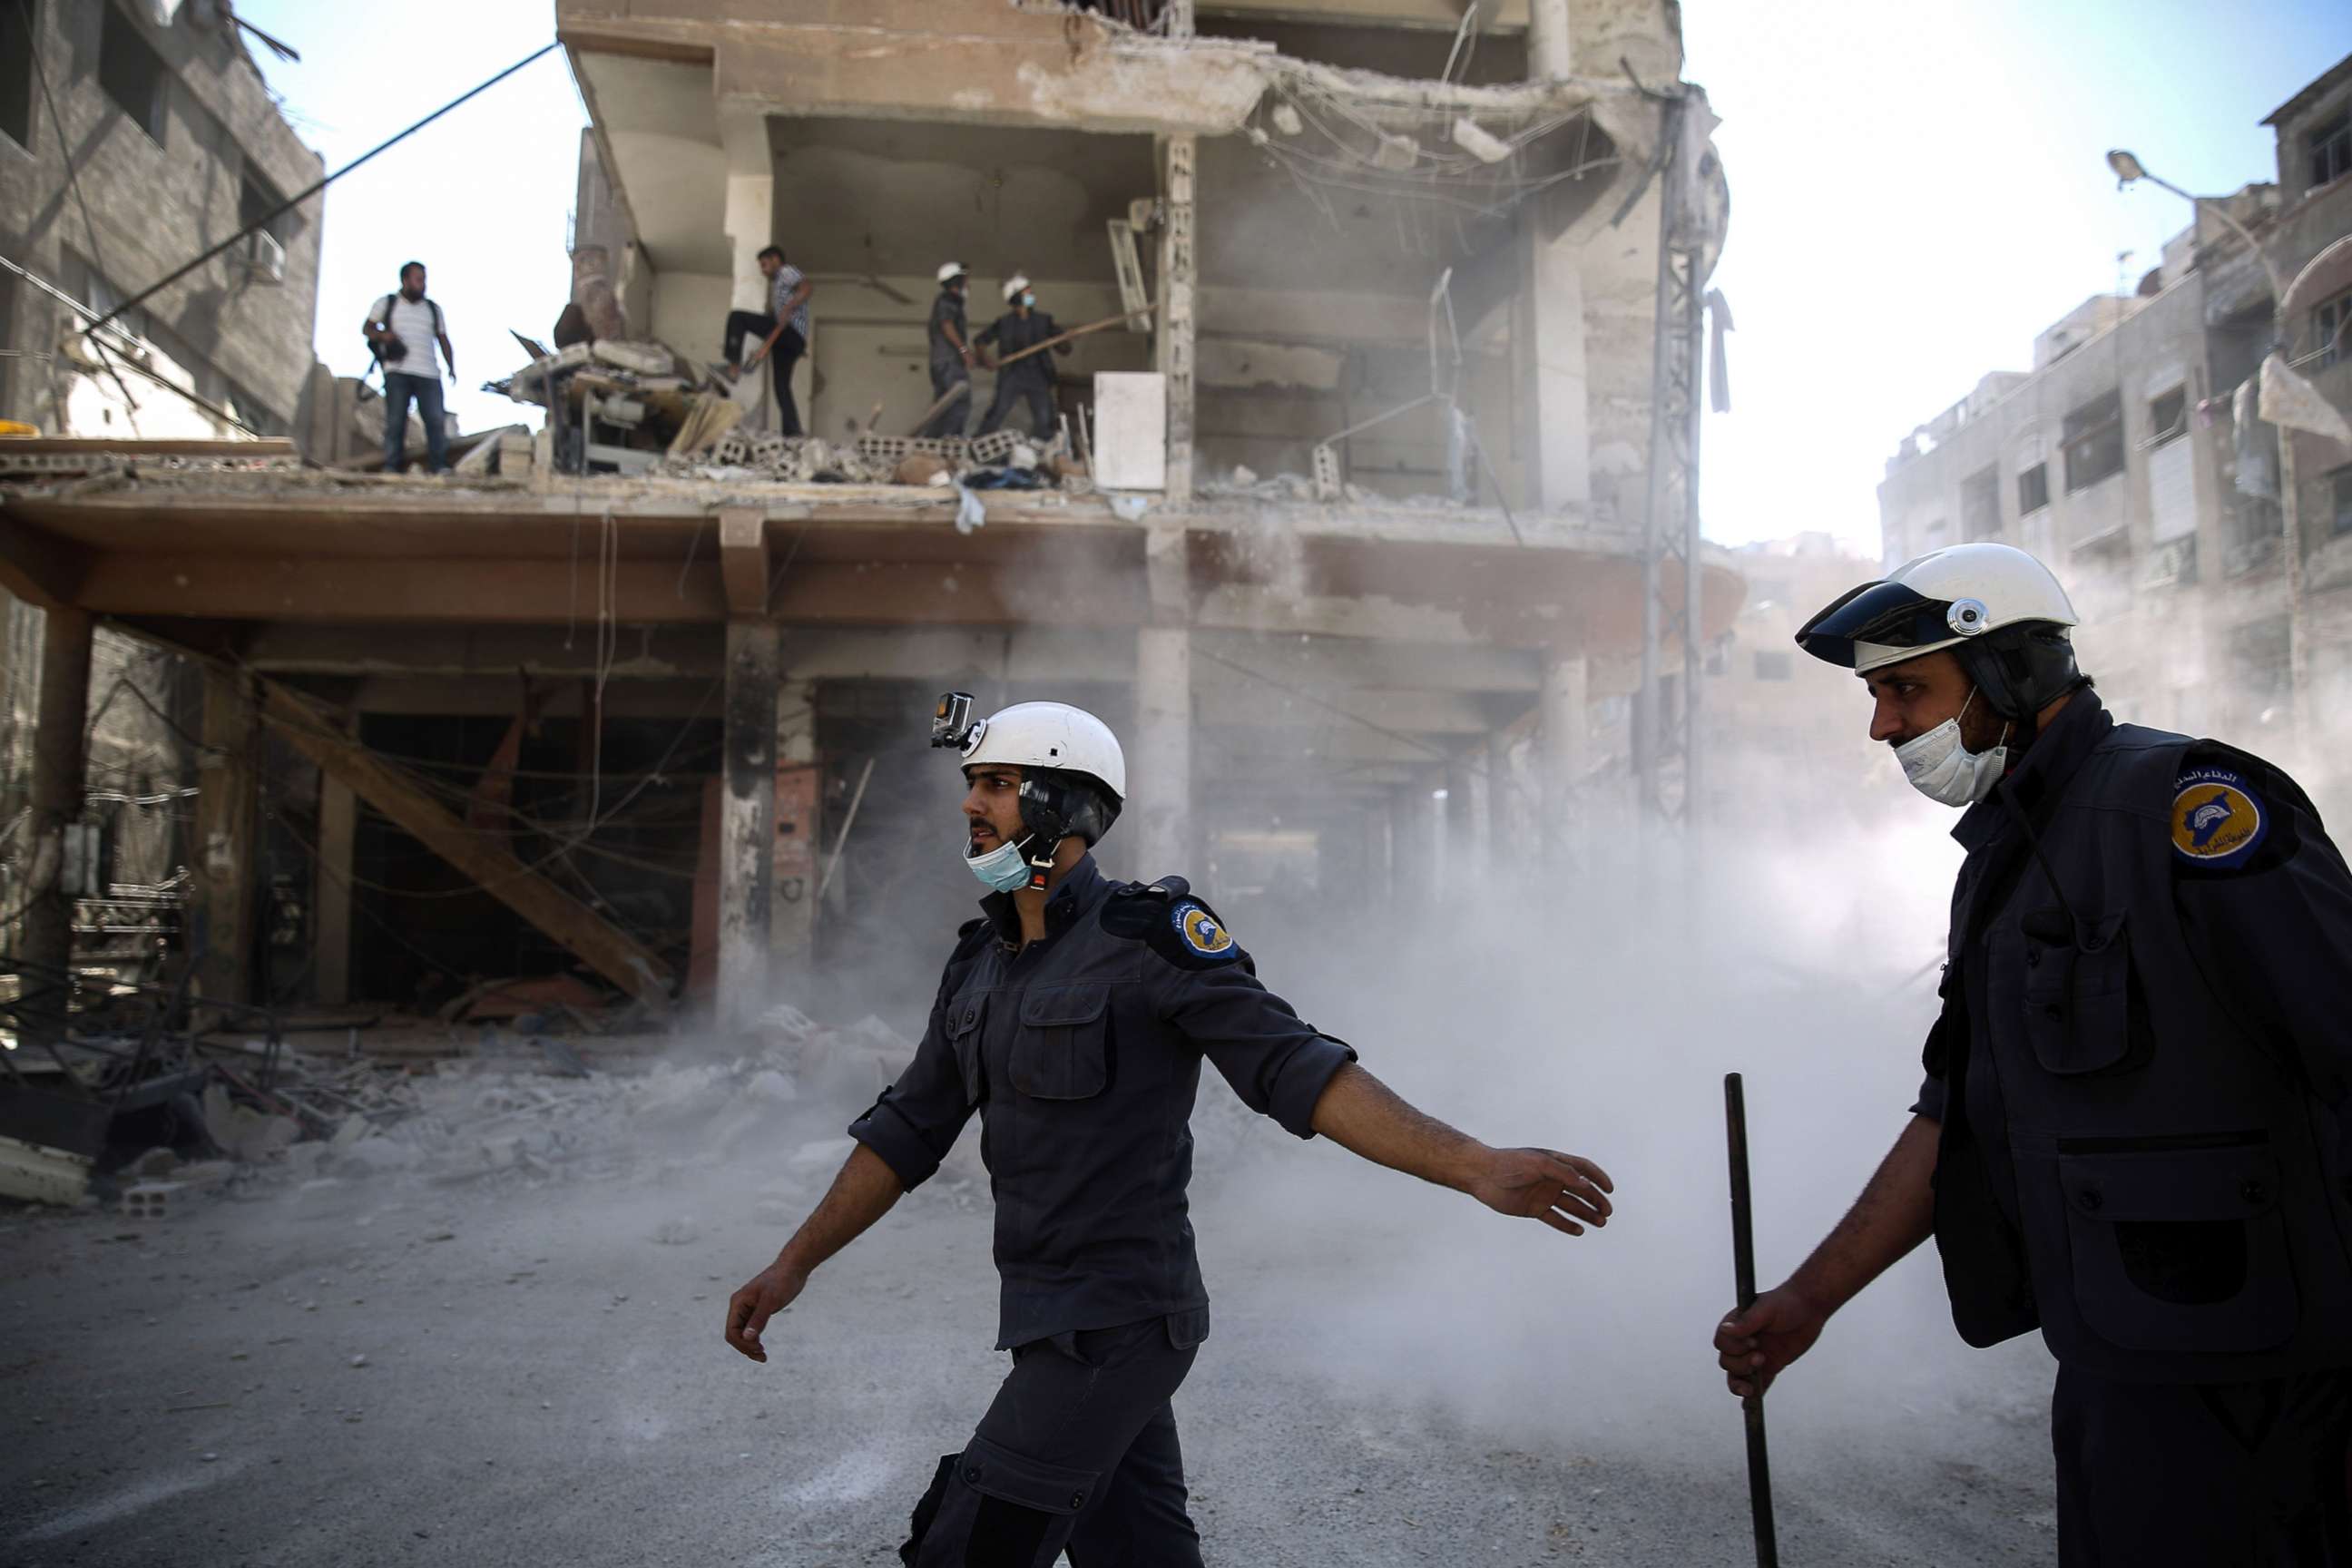 PHOTO: Syrian civil defense volunteers, known as the White Helmets, work around destroyed buildings following reported air strikes on the rebel-held town of Douma, on the eastern outskirts of the capital Damascus, Oct. 5, 2016.